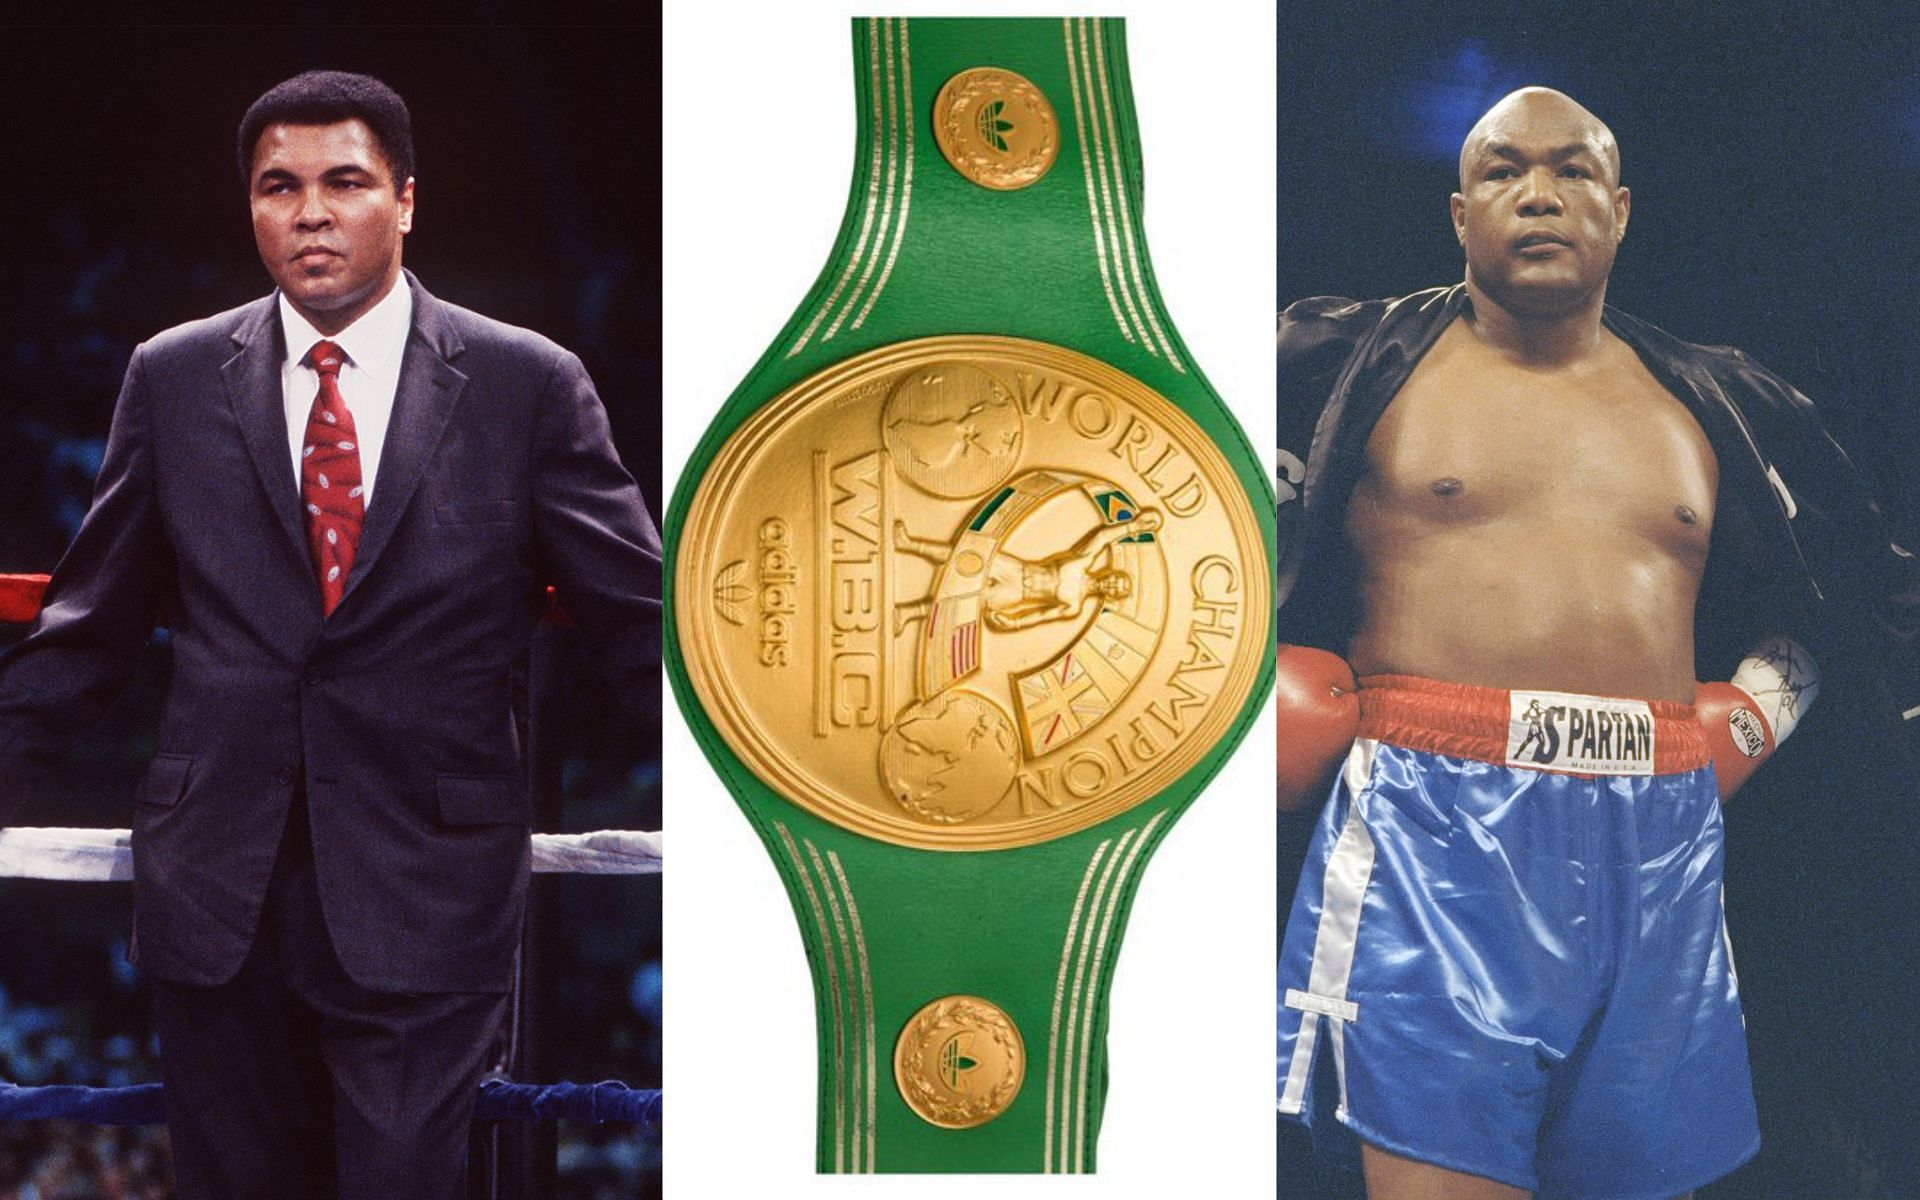 Muhammad Ali (left), the WBC belt (center), and George Foreman (right) (image credits Getty Images)